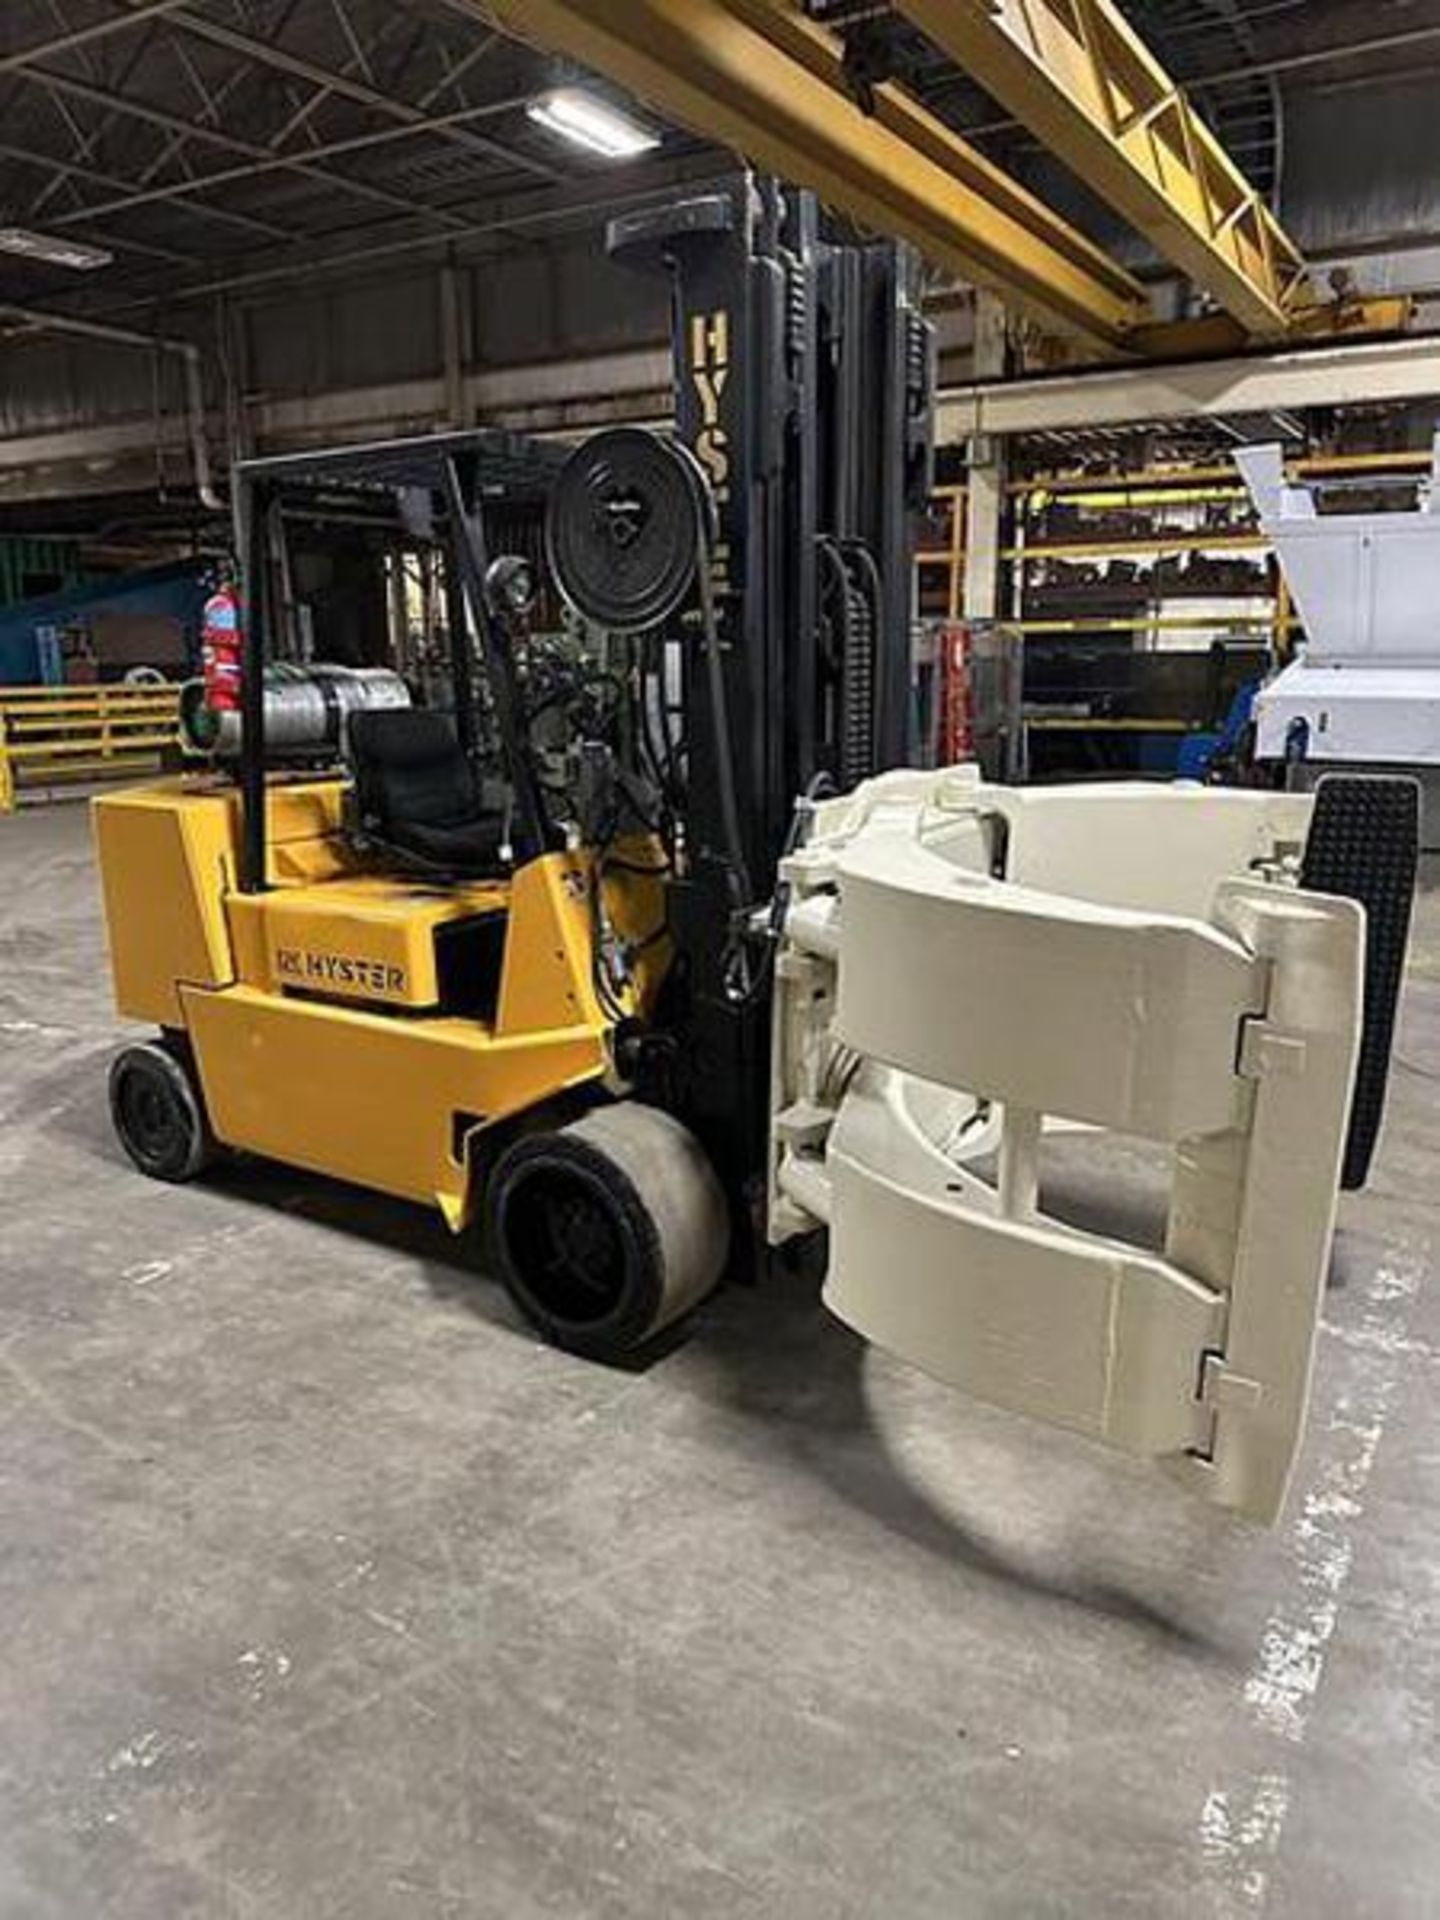 Hyster S120XL2S 12,000lb Forklift w/ Roll Clamp, Cascade 90F 60" Paper roll clamp 8,000lbs cap Class - Image 4 of 7